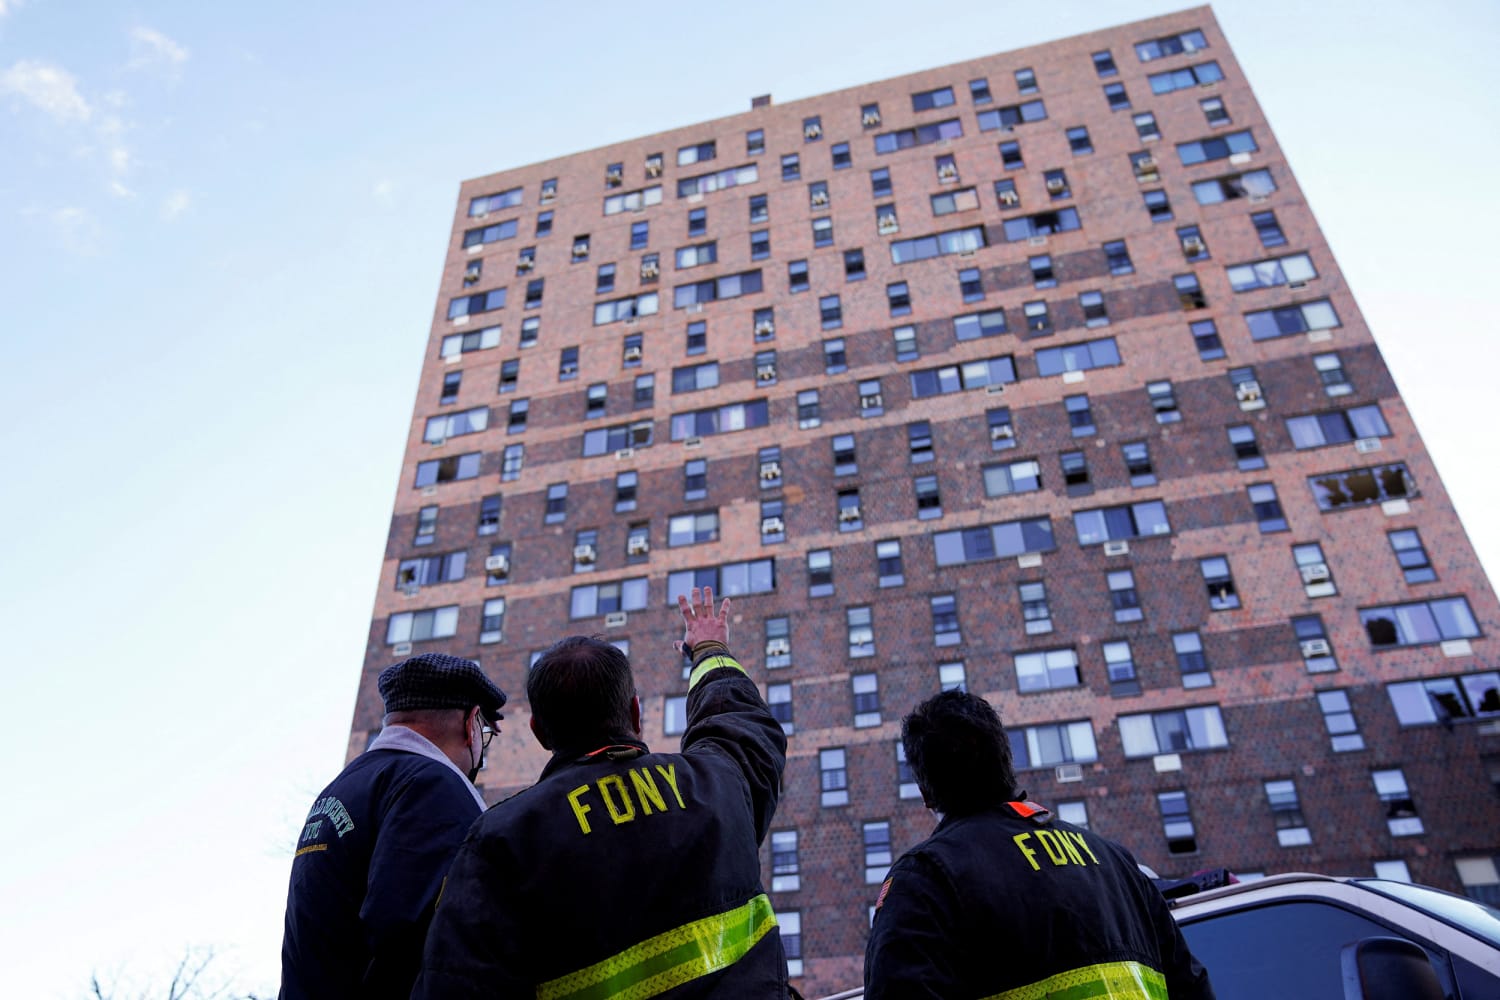 Safety doors failed in Bronx high-rise fire that killed 17, officials say